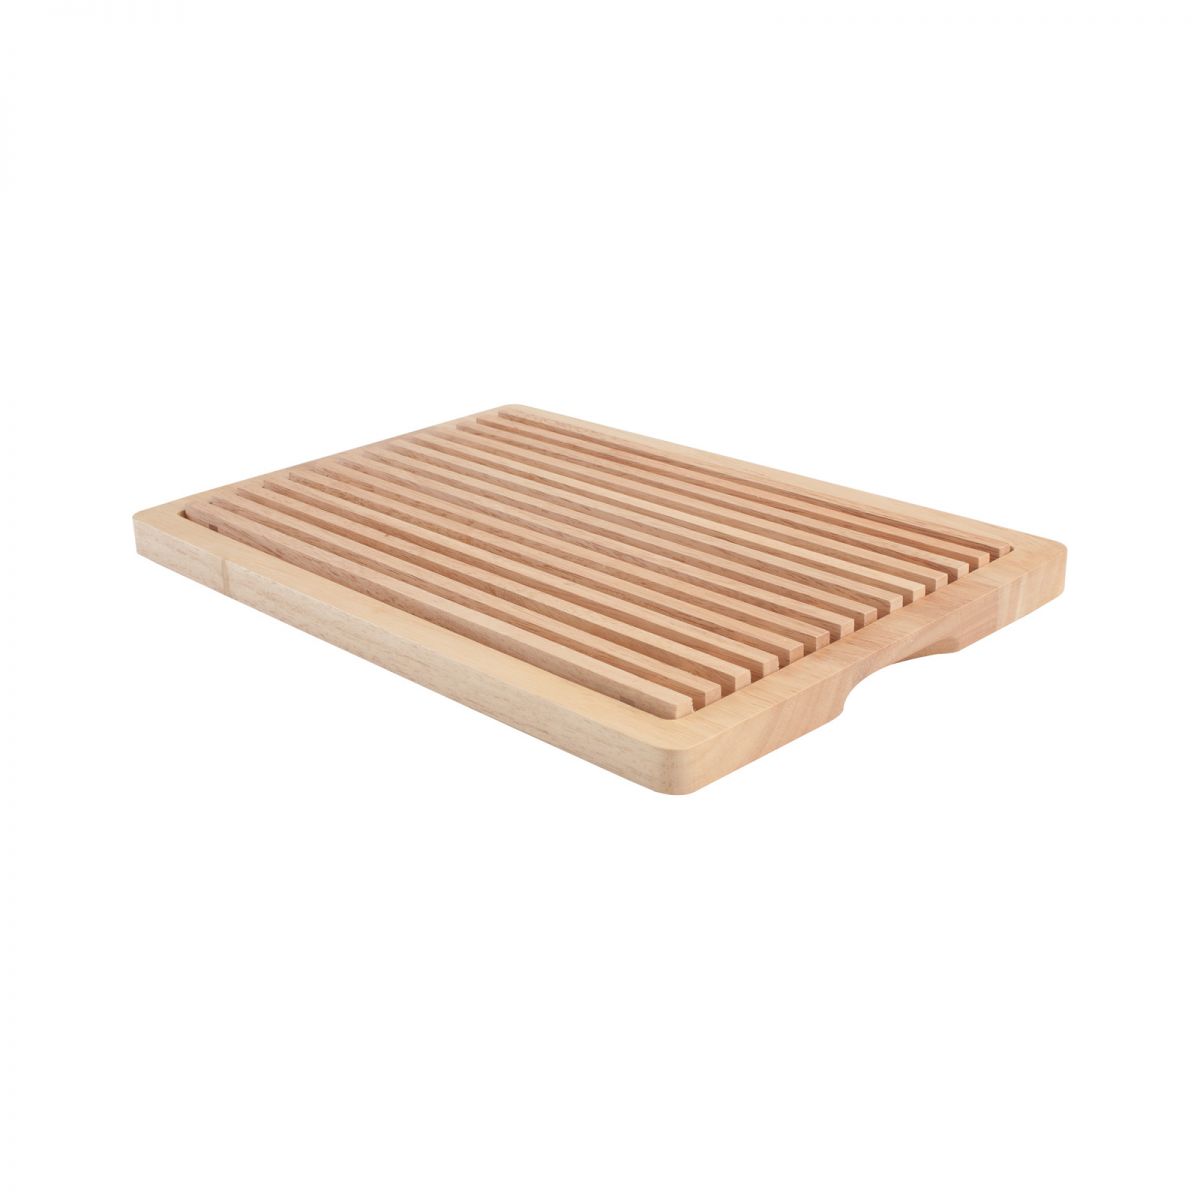 https://www.tg-woodware.com/imagprod/bread-cutting-board-with-removable-section-279.jpg